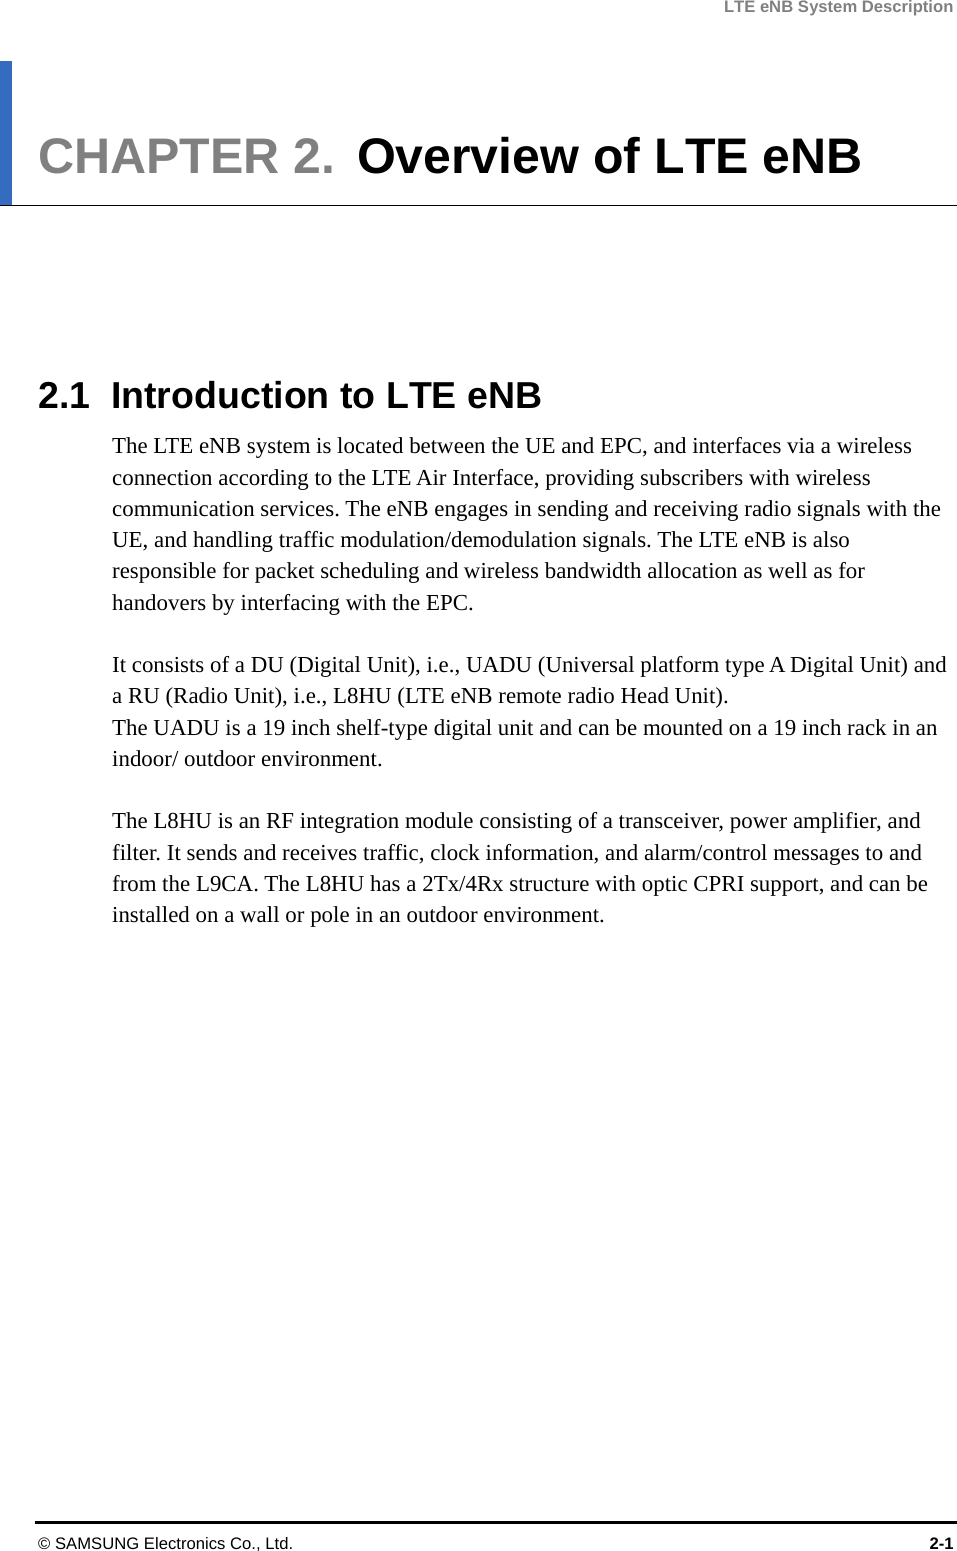 LTE eNB System Description CHAPTER 2.  Overview of LTE eNB      2.1  Introduction to LTE eNB The LTE eNB system is located between the UE and EPC, and interfaces via a wireless connection according to the LTE Air Interface, providing subscribers with wireless communication services. The eNB engages in sending and receiving radio signals with the UE, and handling traffic modulation/demodulation signals. The LTE eNB is also responsible for packet scheduling and wireless bandwidth allocation as well as for handovers by interfacing with the EPC.  It consists of a DU (Digital Unit), i.e., UADU (Universal platform type A Digital Unit) and a RU (Radio Unit), i.e., L8HU (LTE eNB remote radio Head Unit).   The UADU is a 19 inch shelf-type digital unit and can be mounted on a 19 inch rack in an indoor/ outdoor environment.  The L8HU is an RF integration module consisting of a transceiver, power amplifier, and filter. It sends and receives traffic, clock information, and alarm/control messages to and from the L9CA. The L8HU has a 2Tx/4Rx structure with optic CPRI support, and can be installed on a wall or pole in an outdoor environment. © SAMSUNG Electronics Co., Ltd.  2-1 